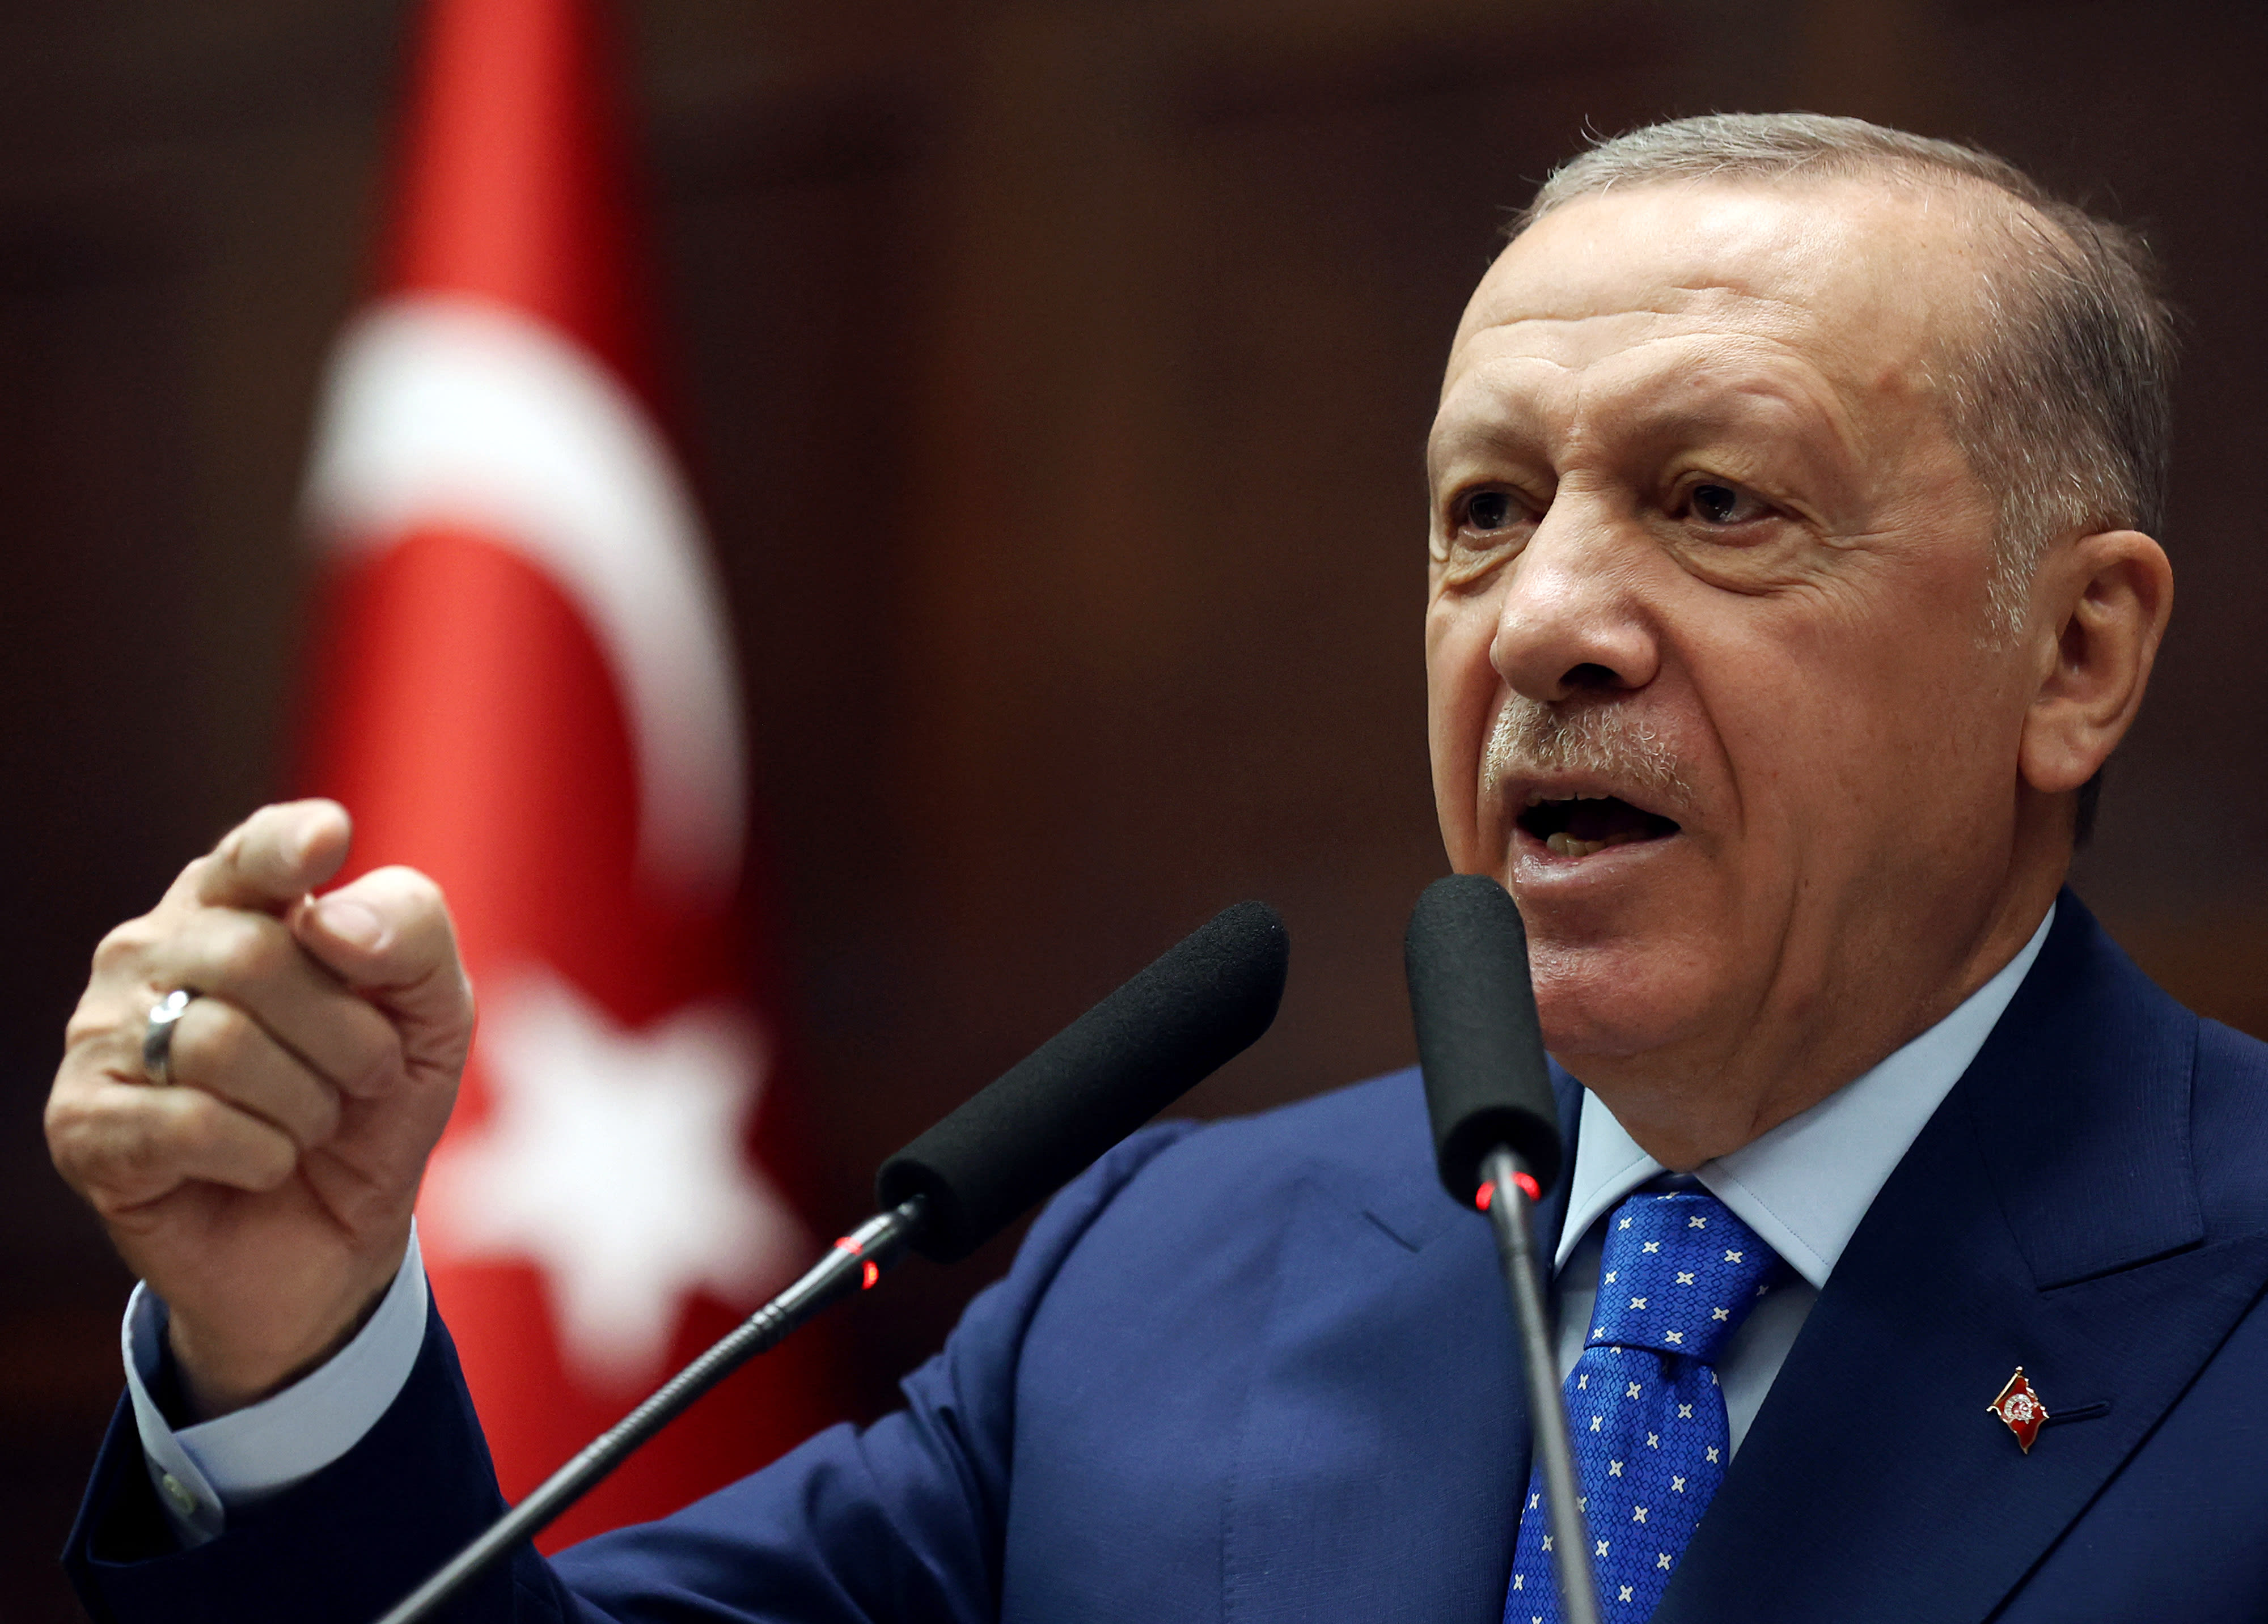 Mr Erdogan said Nato allies had never supported Turkey in its fight against Kurdish militant groups, including the Syrian Kurdish YPG, which Ankara also views as a terrorist group closely tied to the PKK.